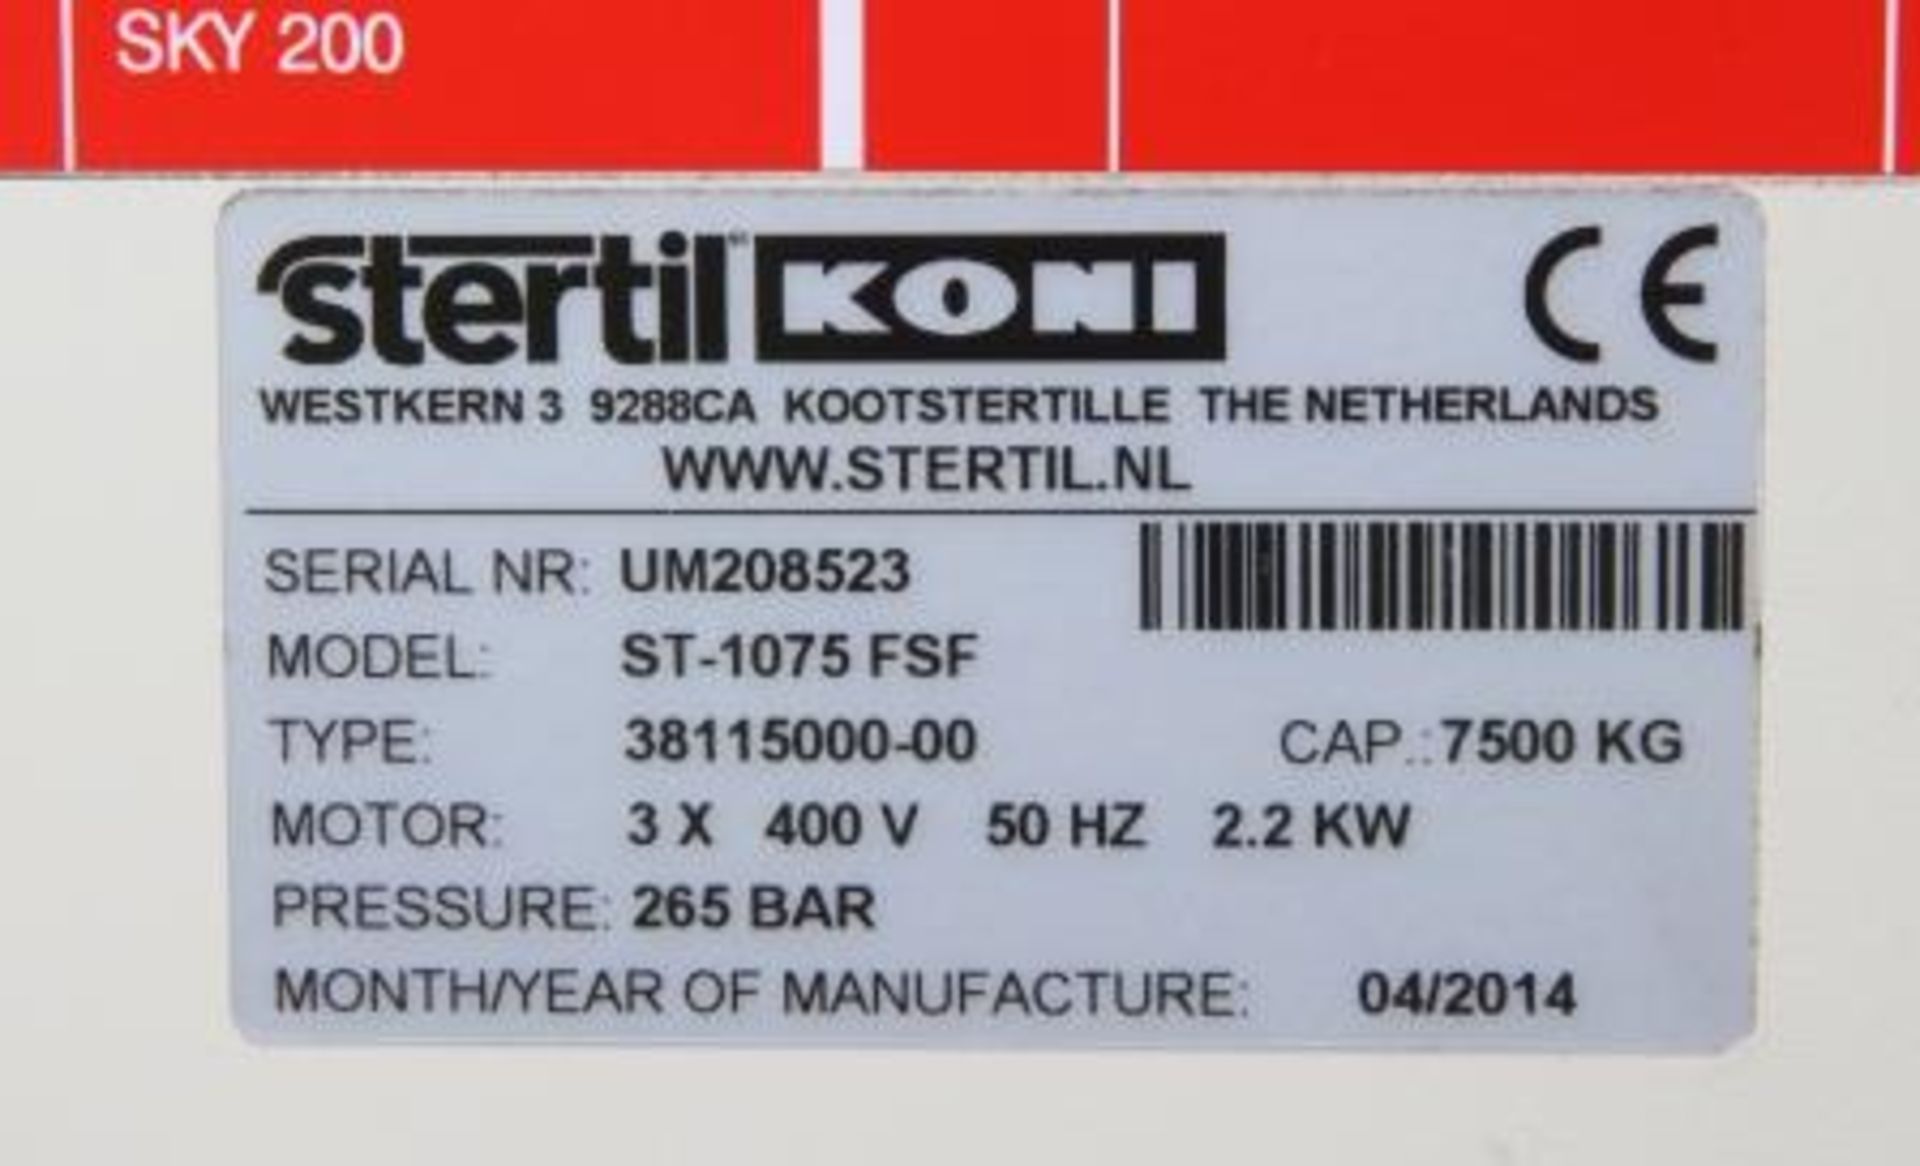 Stertil Koni Mobile Column Lifts (Cabled) - Image 11 of 20